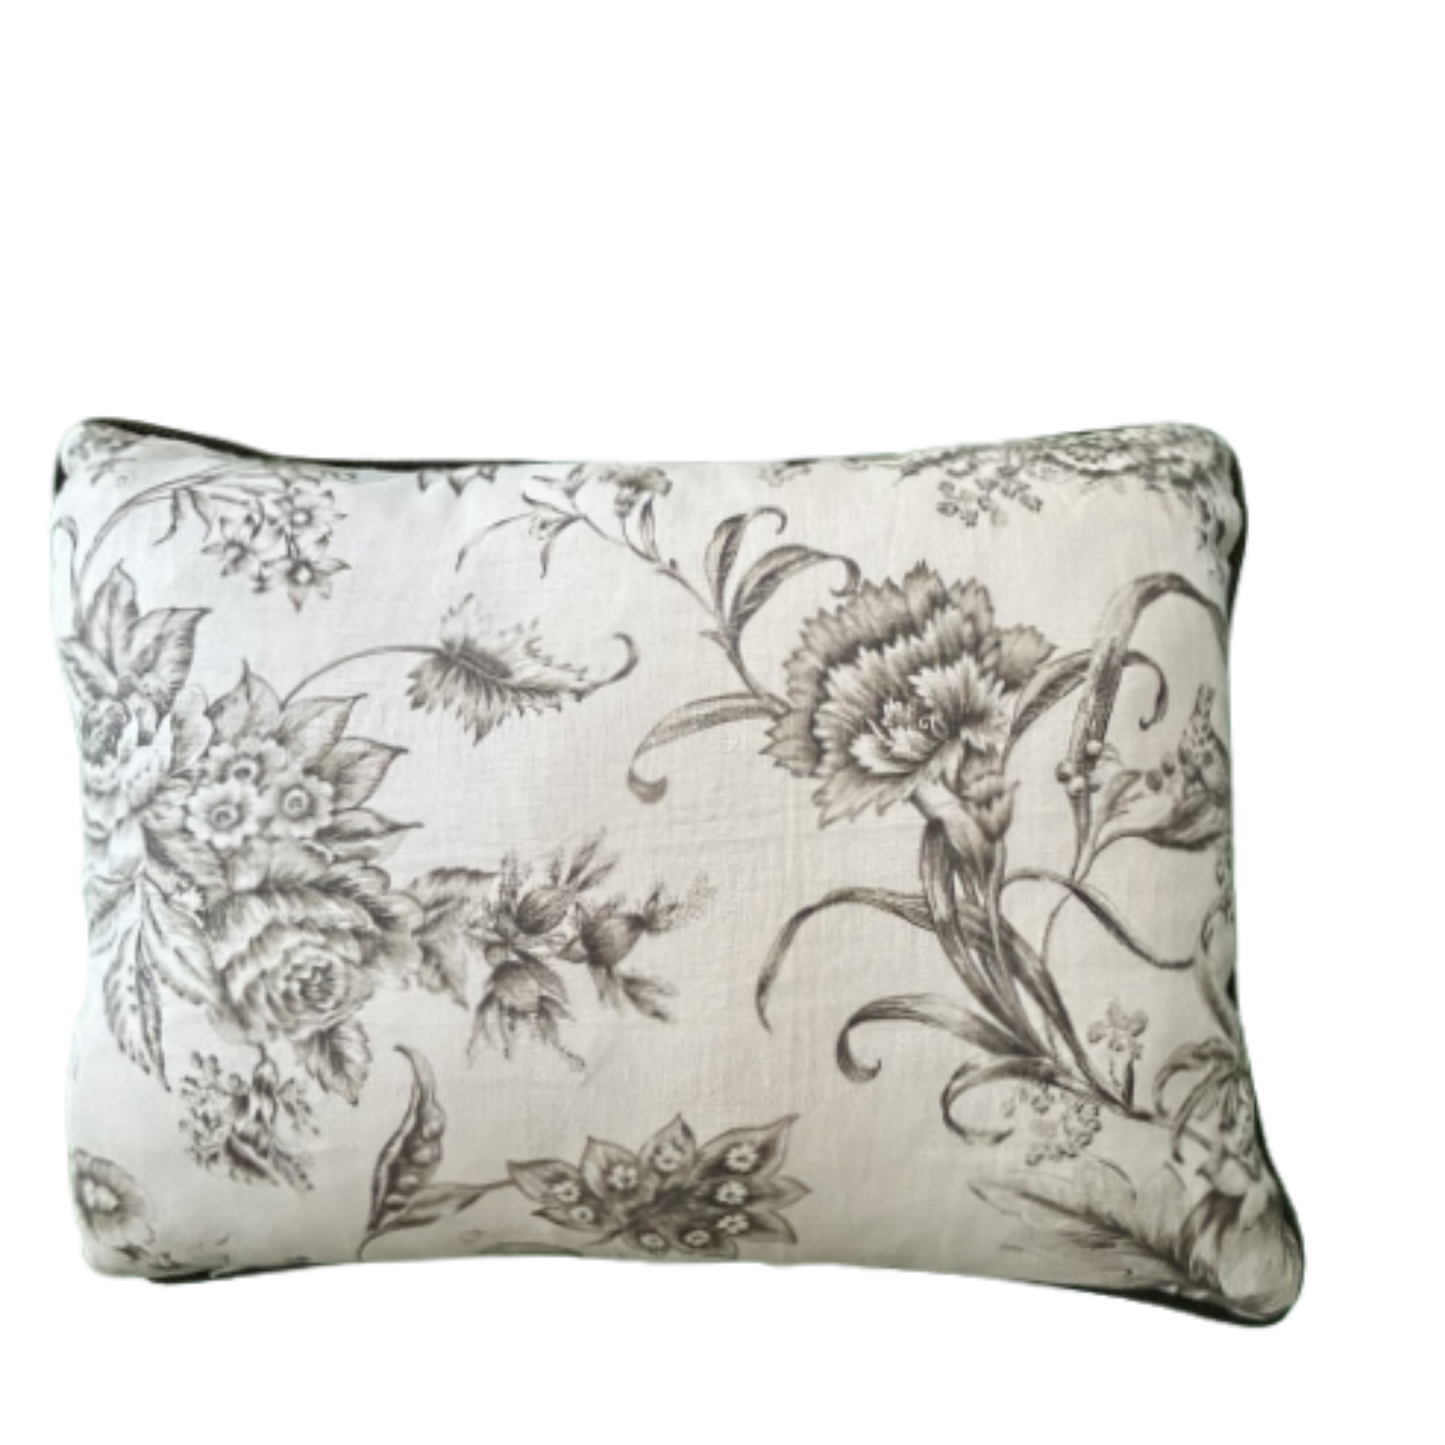 Autumn Promenade Brunschwig Charcoal Document Print 16 x 22 Decorative Pillow with Down/Feather Insert